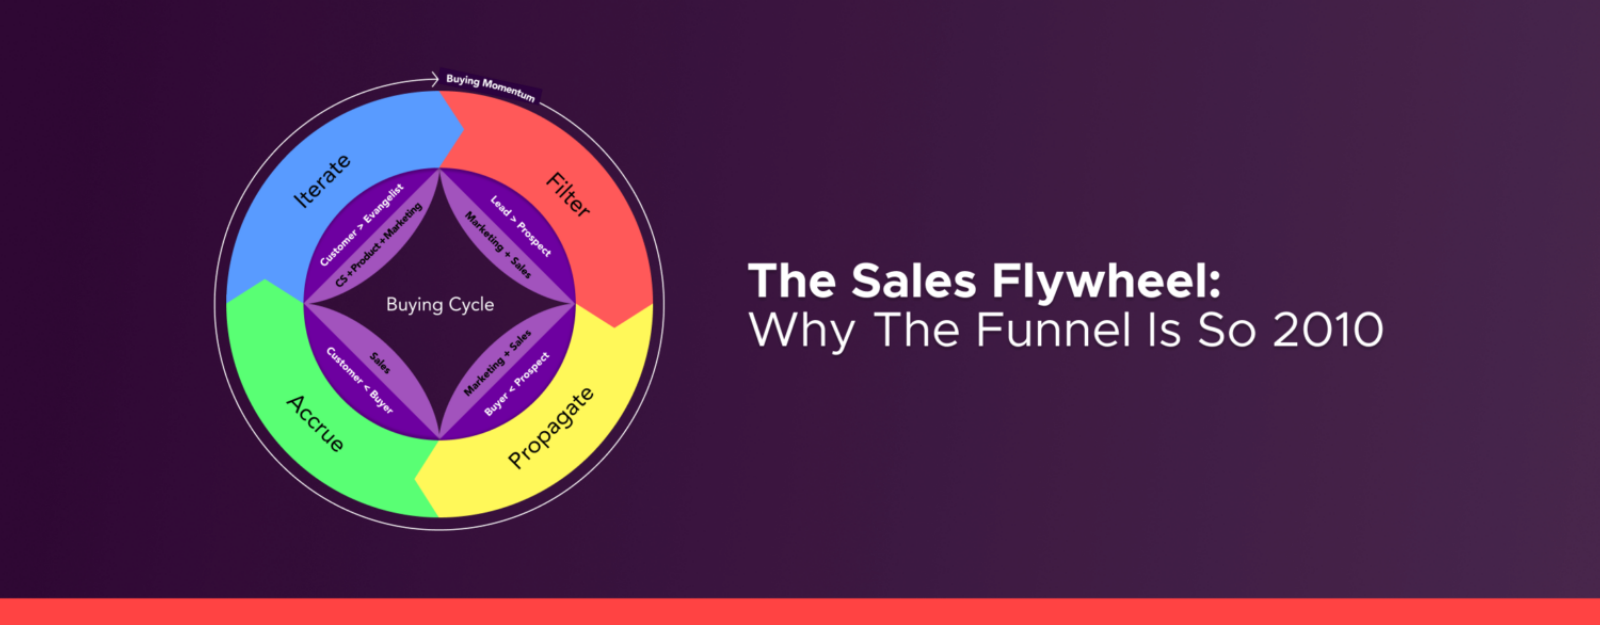 The Sales Flywheel: Why The Funnel Is So 2010